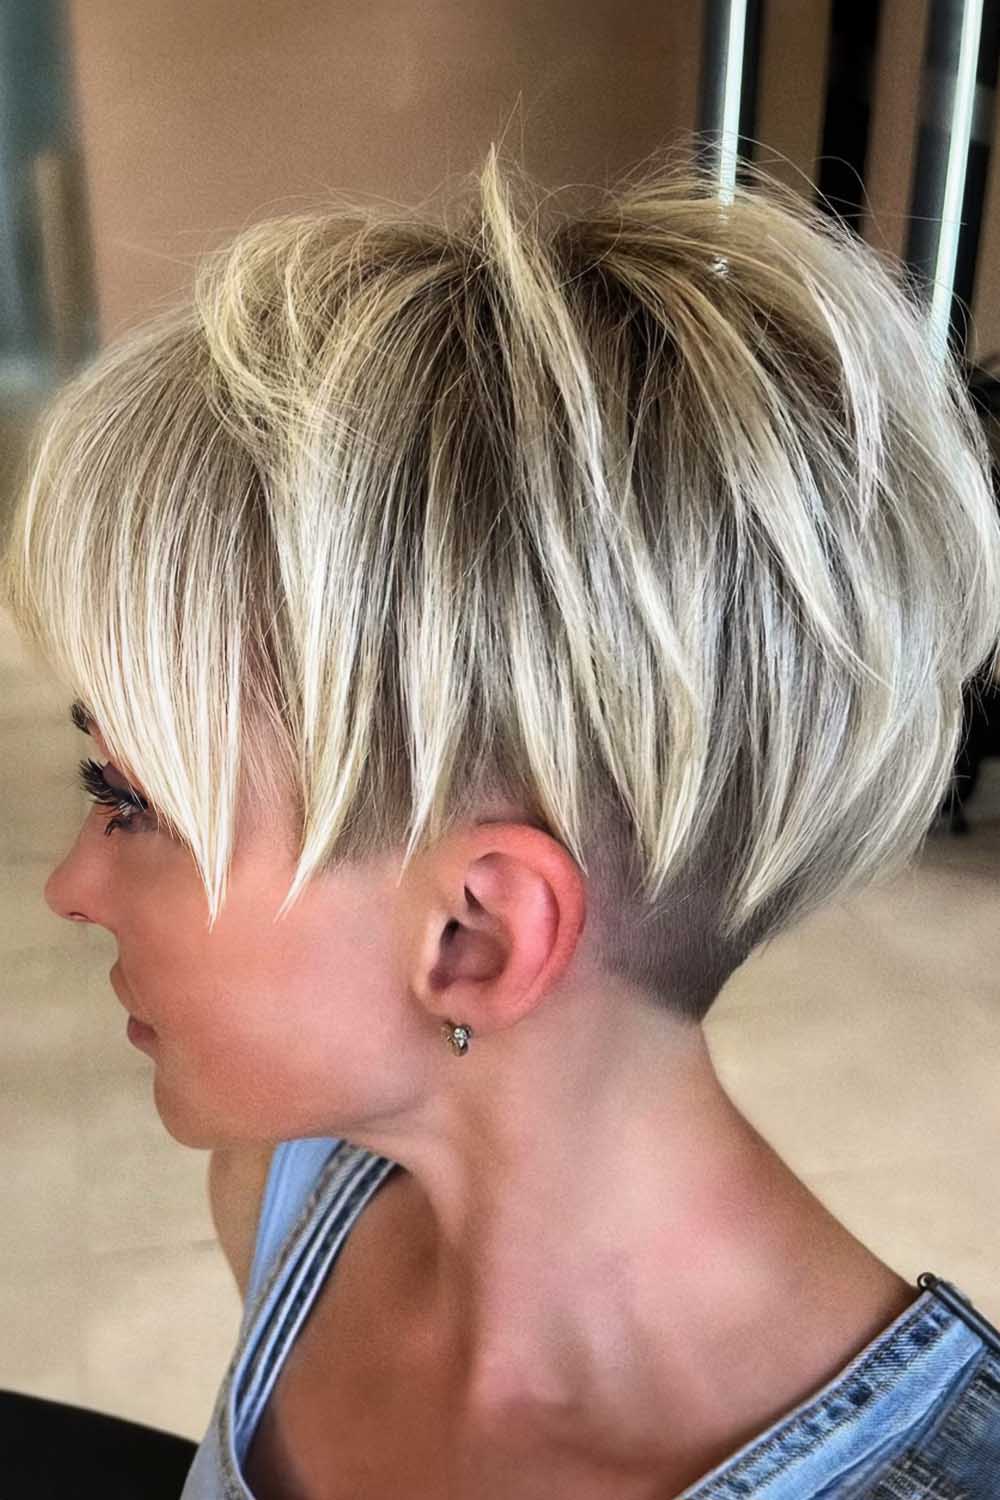 13 Very Short Hairstyles for Women that You Should Try in 2020 | All Things  Hair ZA